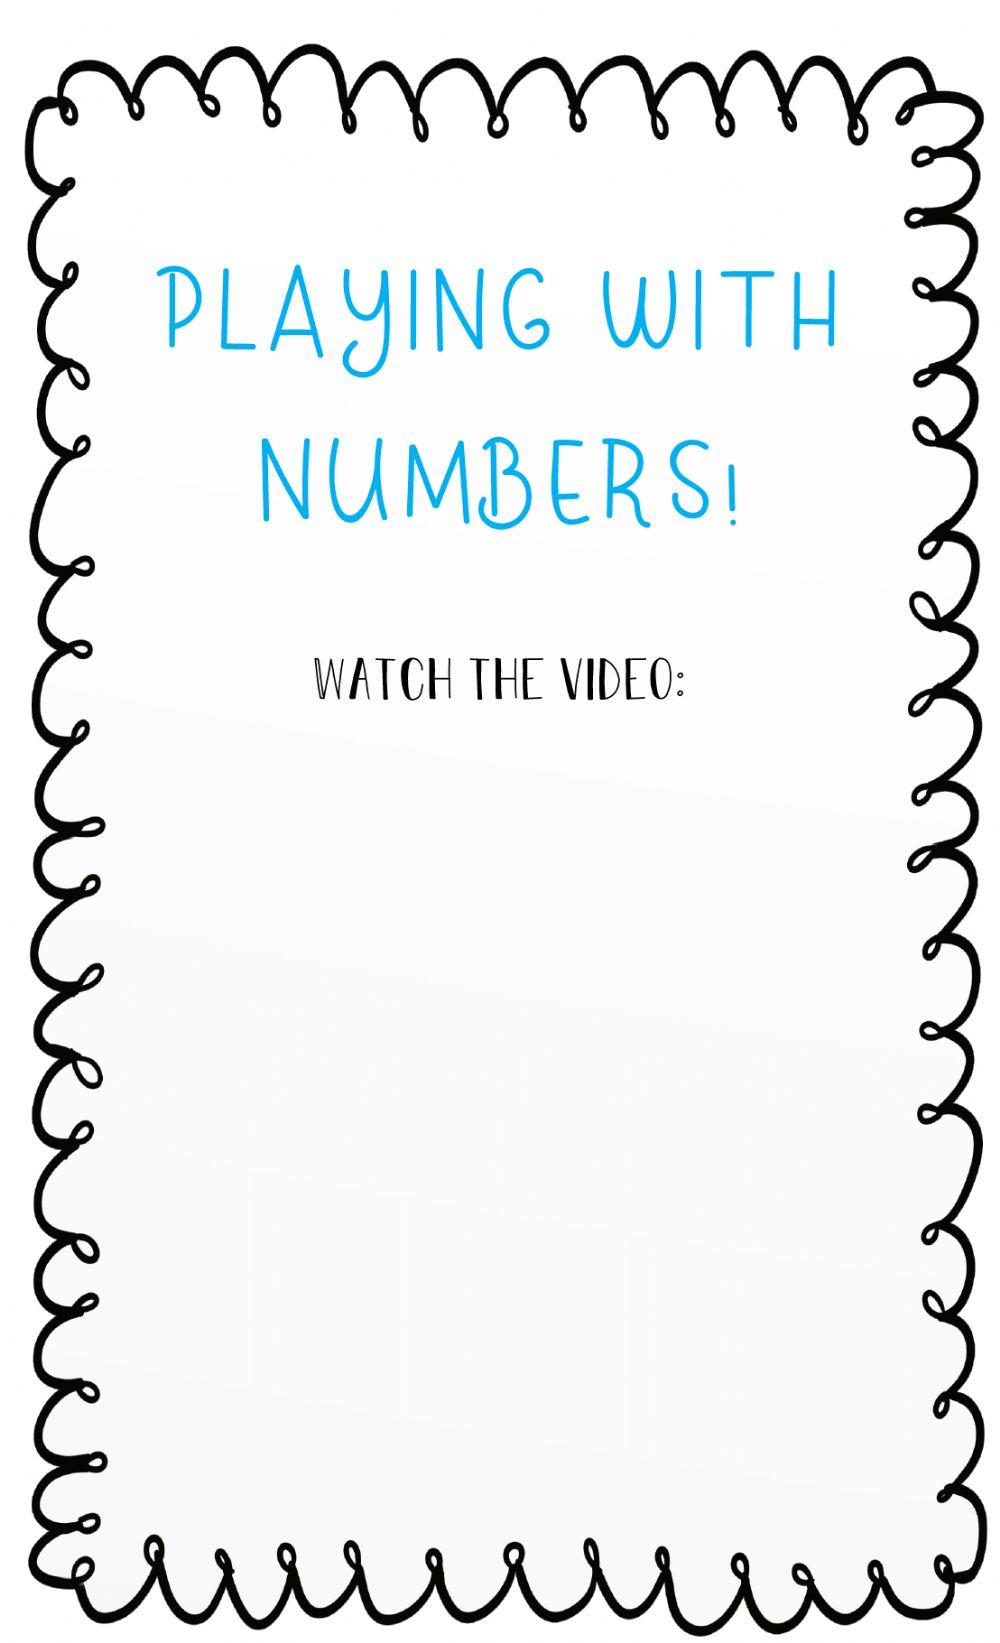 Playing with numbers